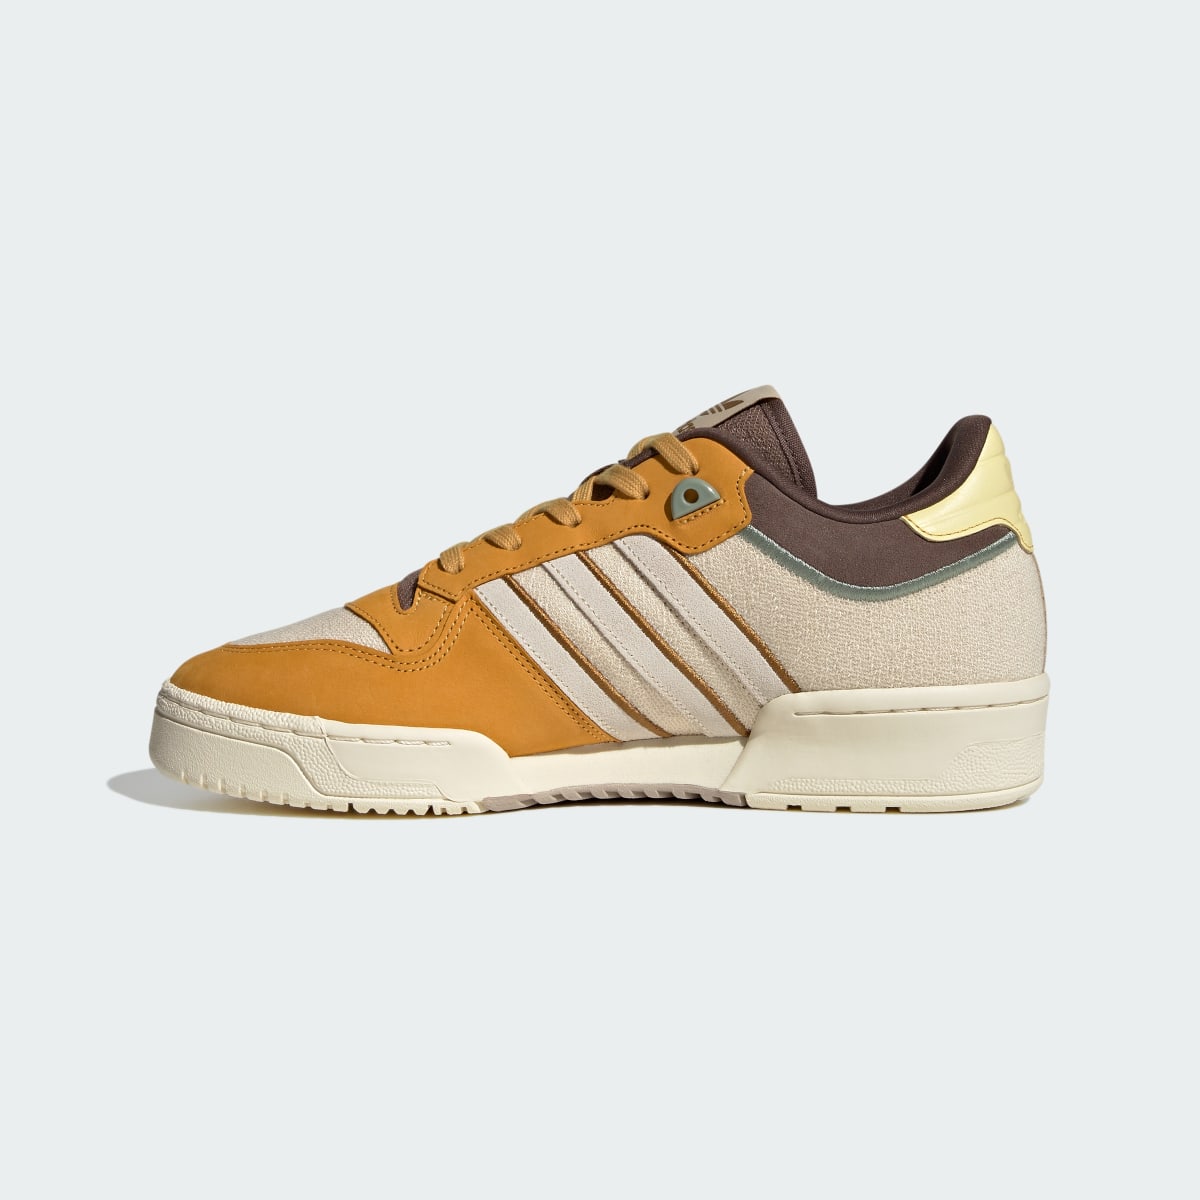 Adidas Rivalry Low 86 Basketball Shoes. 7